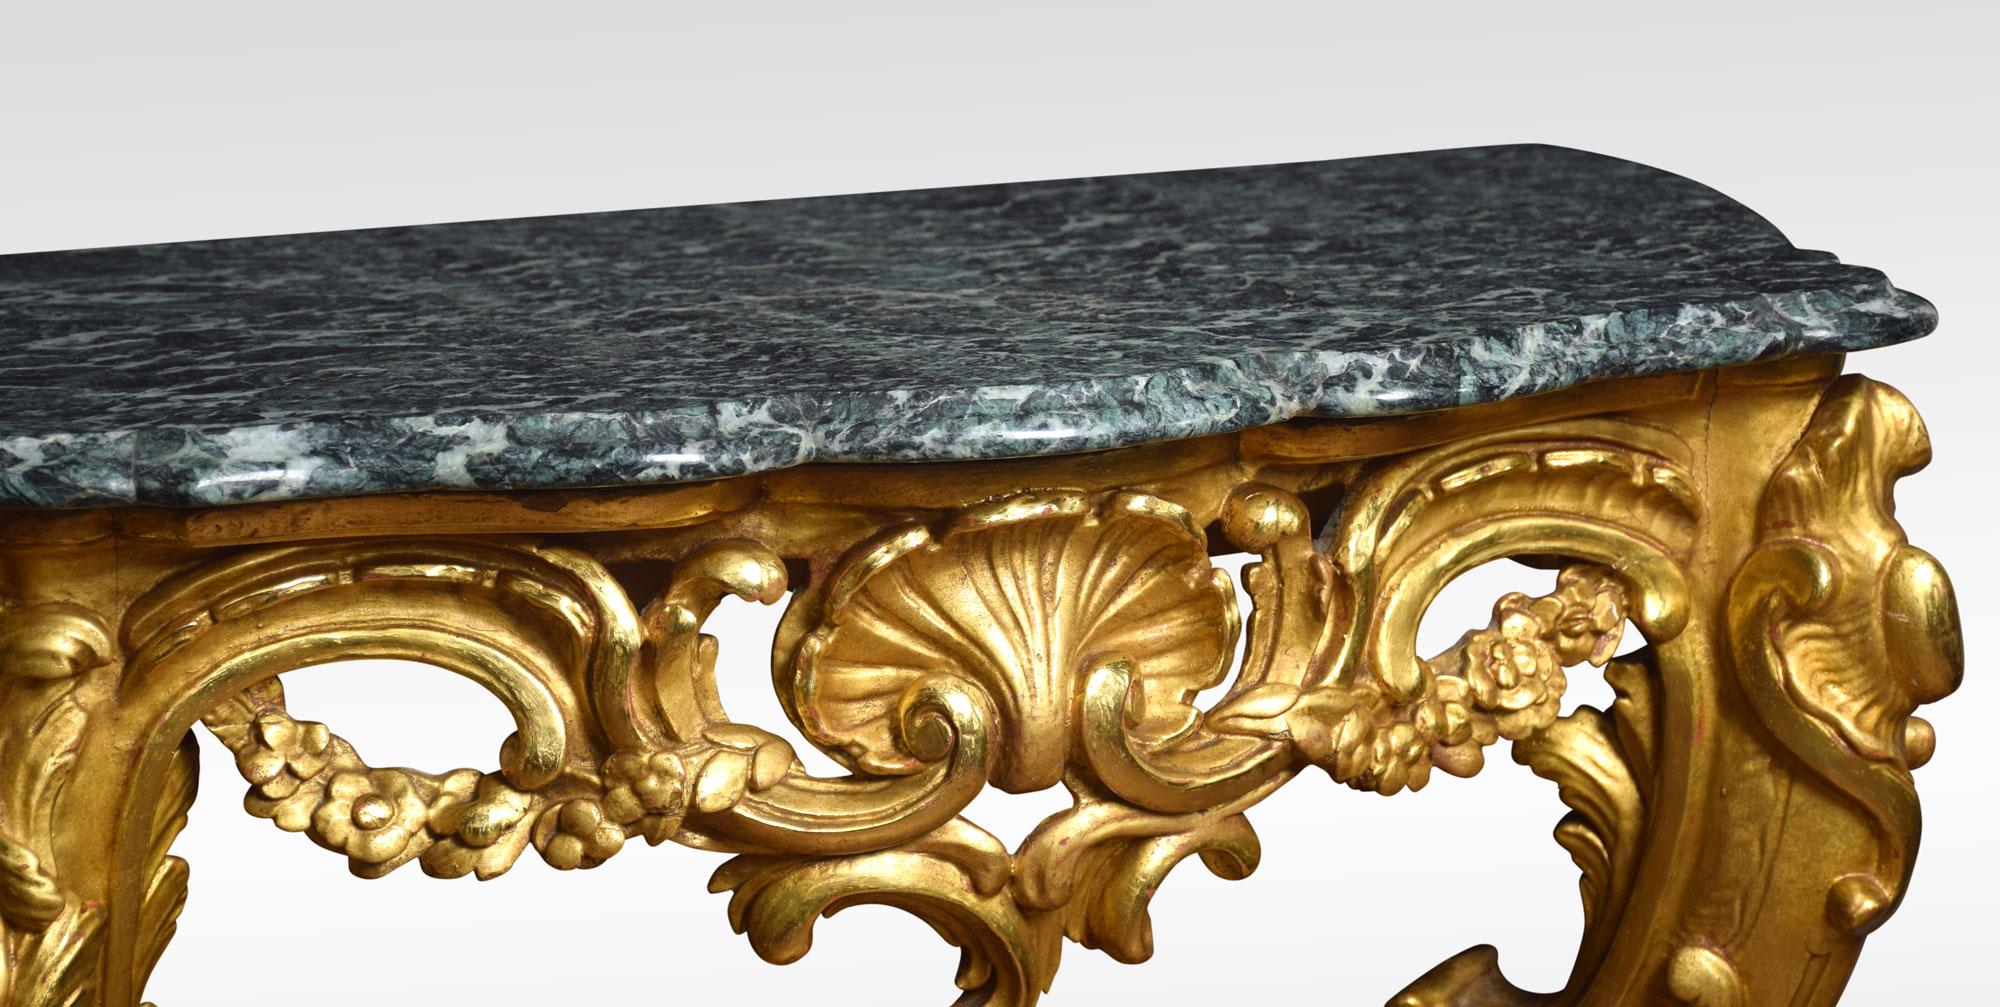 19th Century Rococo Revival Giltwood and Marble Console Table